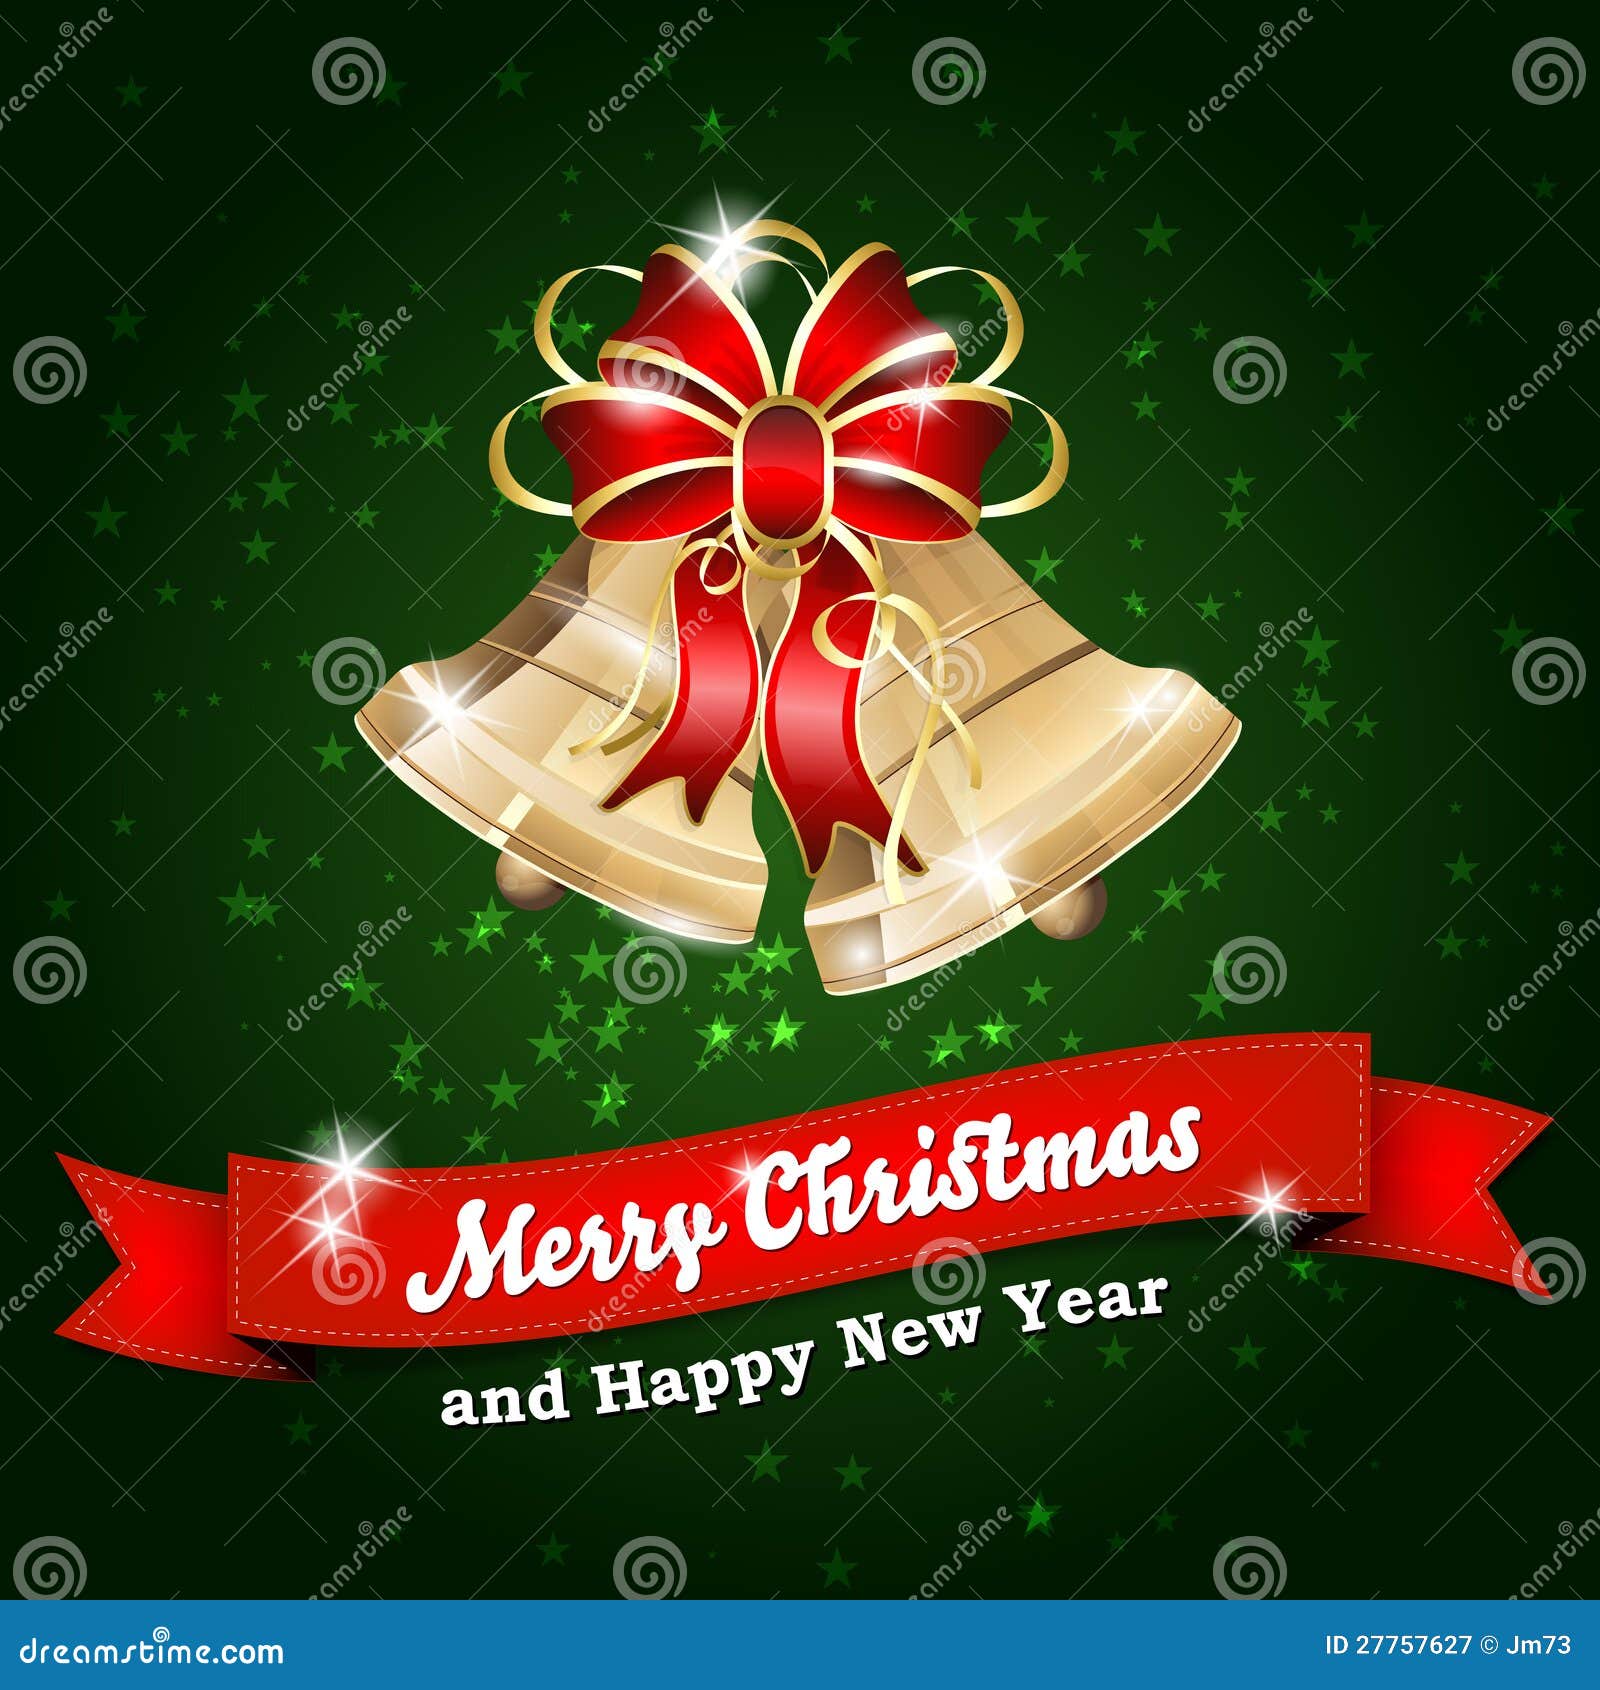 Merry Christmas And Happy New Year Background Stock Vector - Illustration of holiday, gift: 27757627